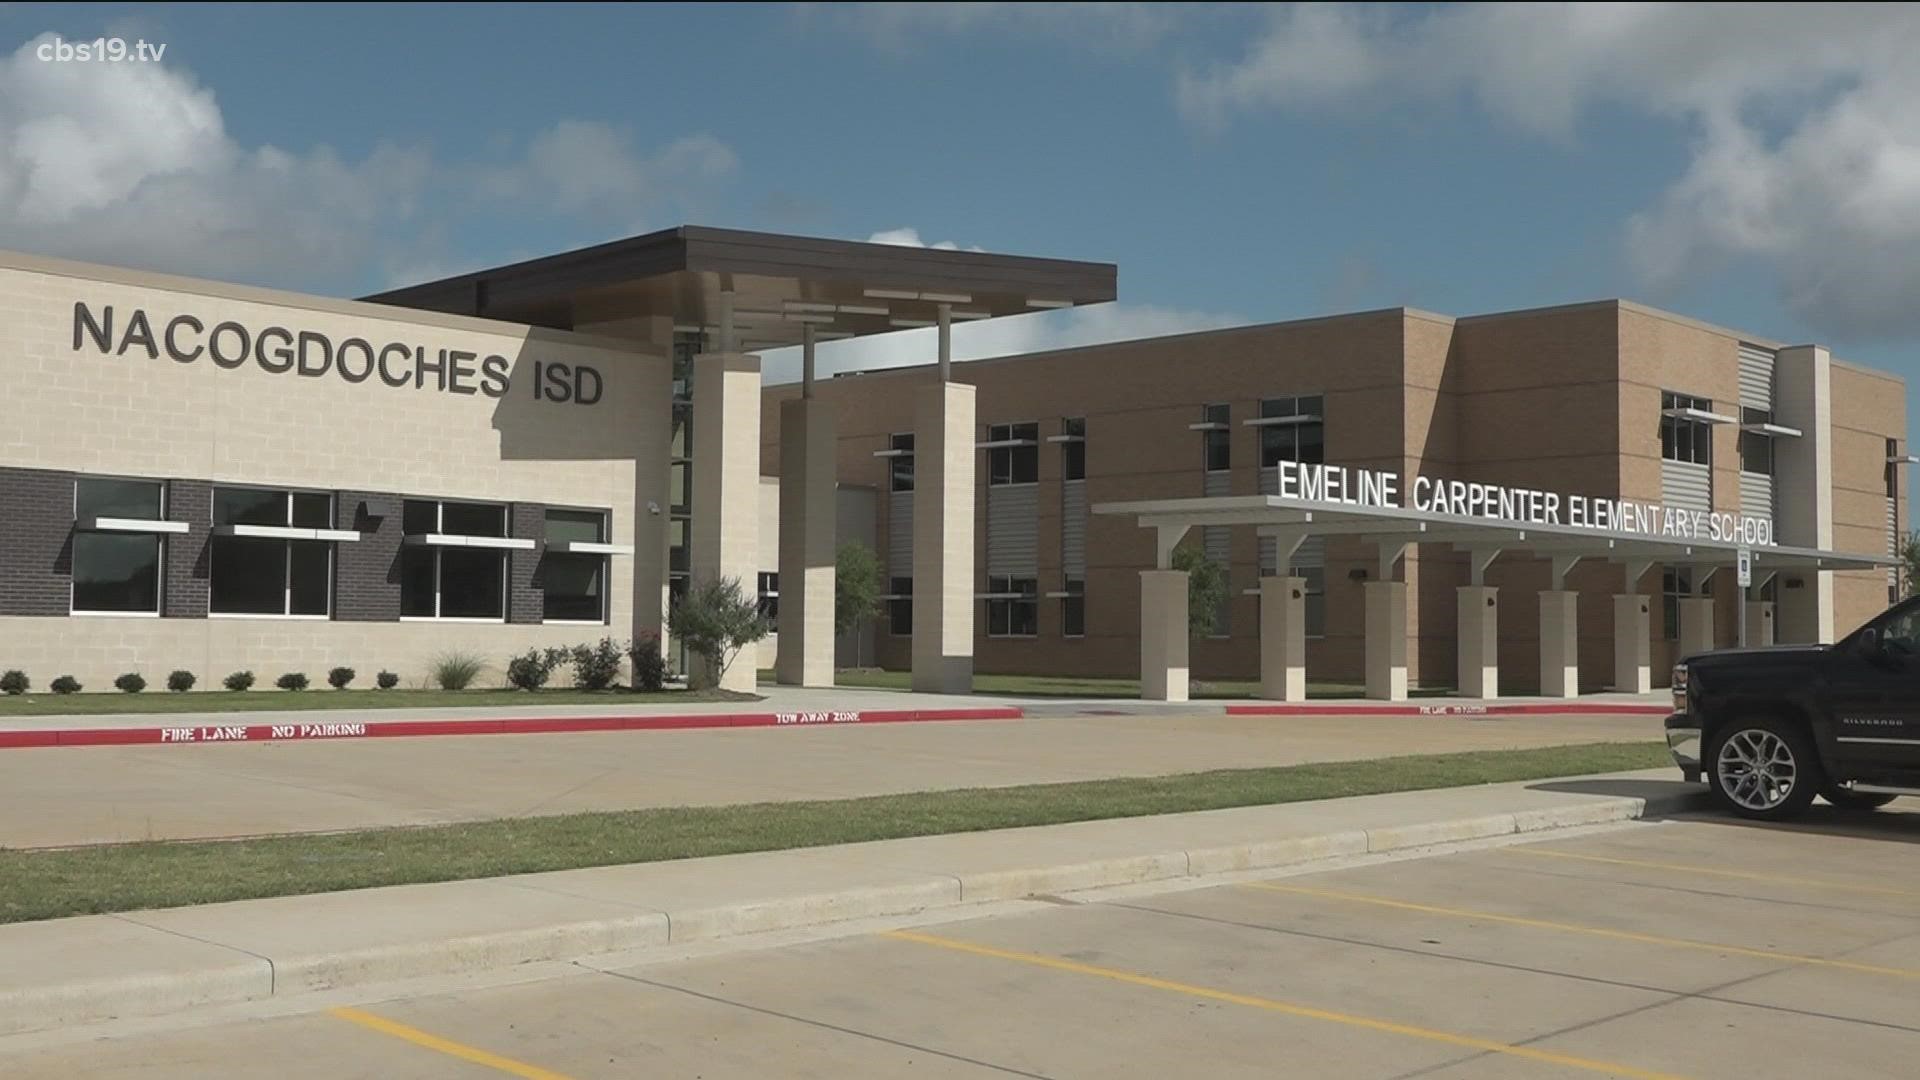 "We're looking forward to the first day of school to see those smiling faces as they come to see this new facility."